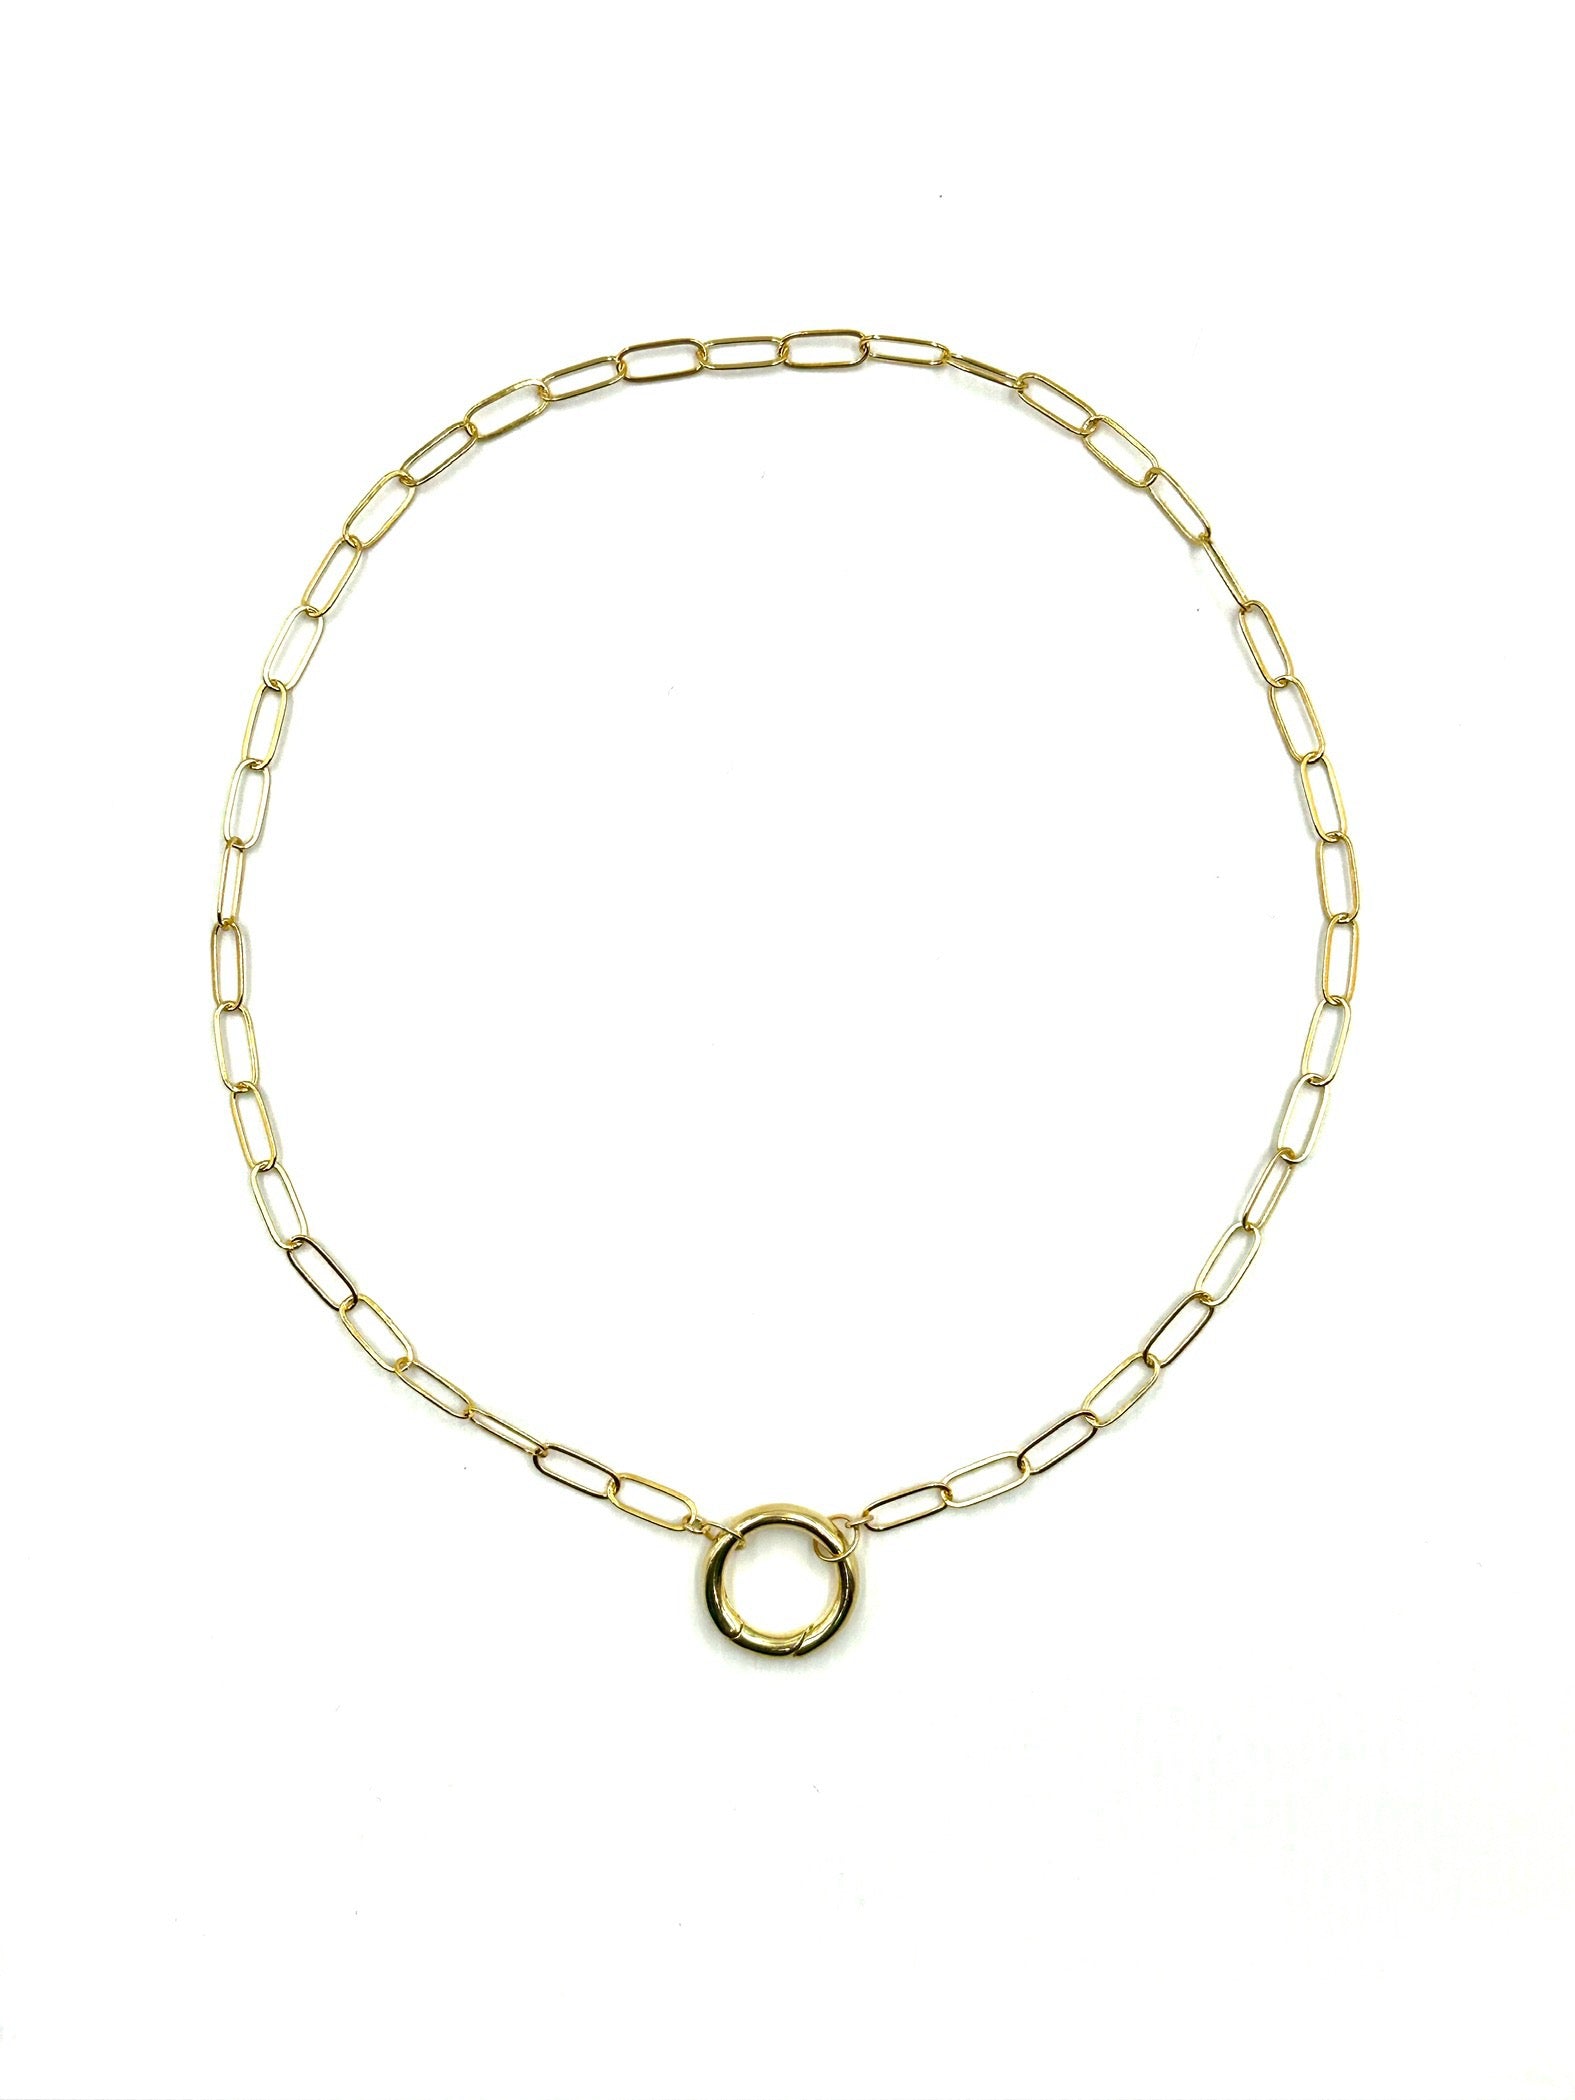 Nina - Gold filled link necklace with gold filled carabiner clasp